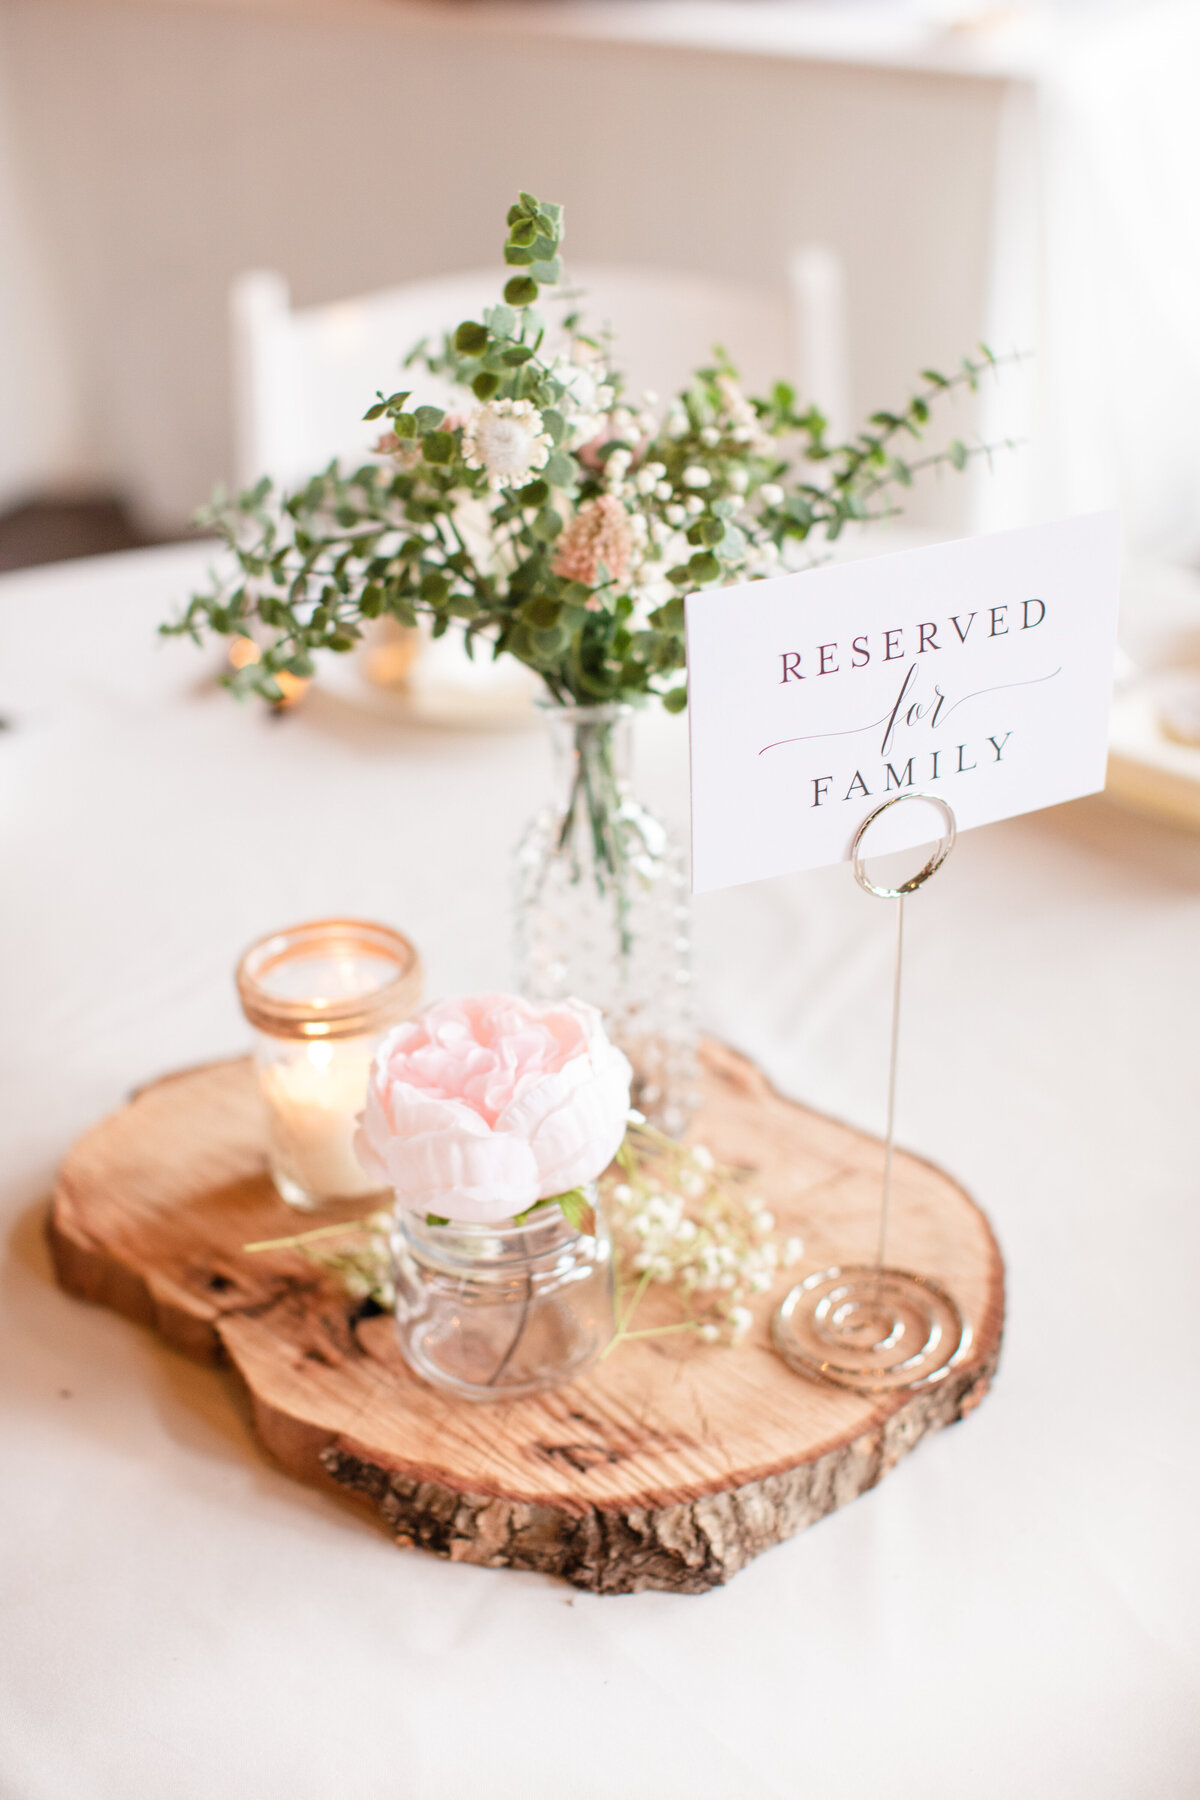 wood slice centerpiece with bud vase and reserved for family sign at Texas wedding